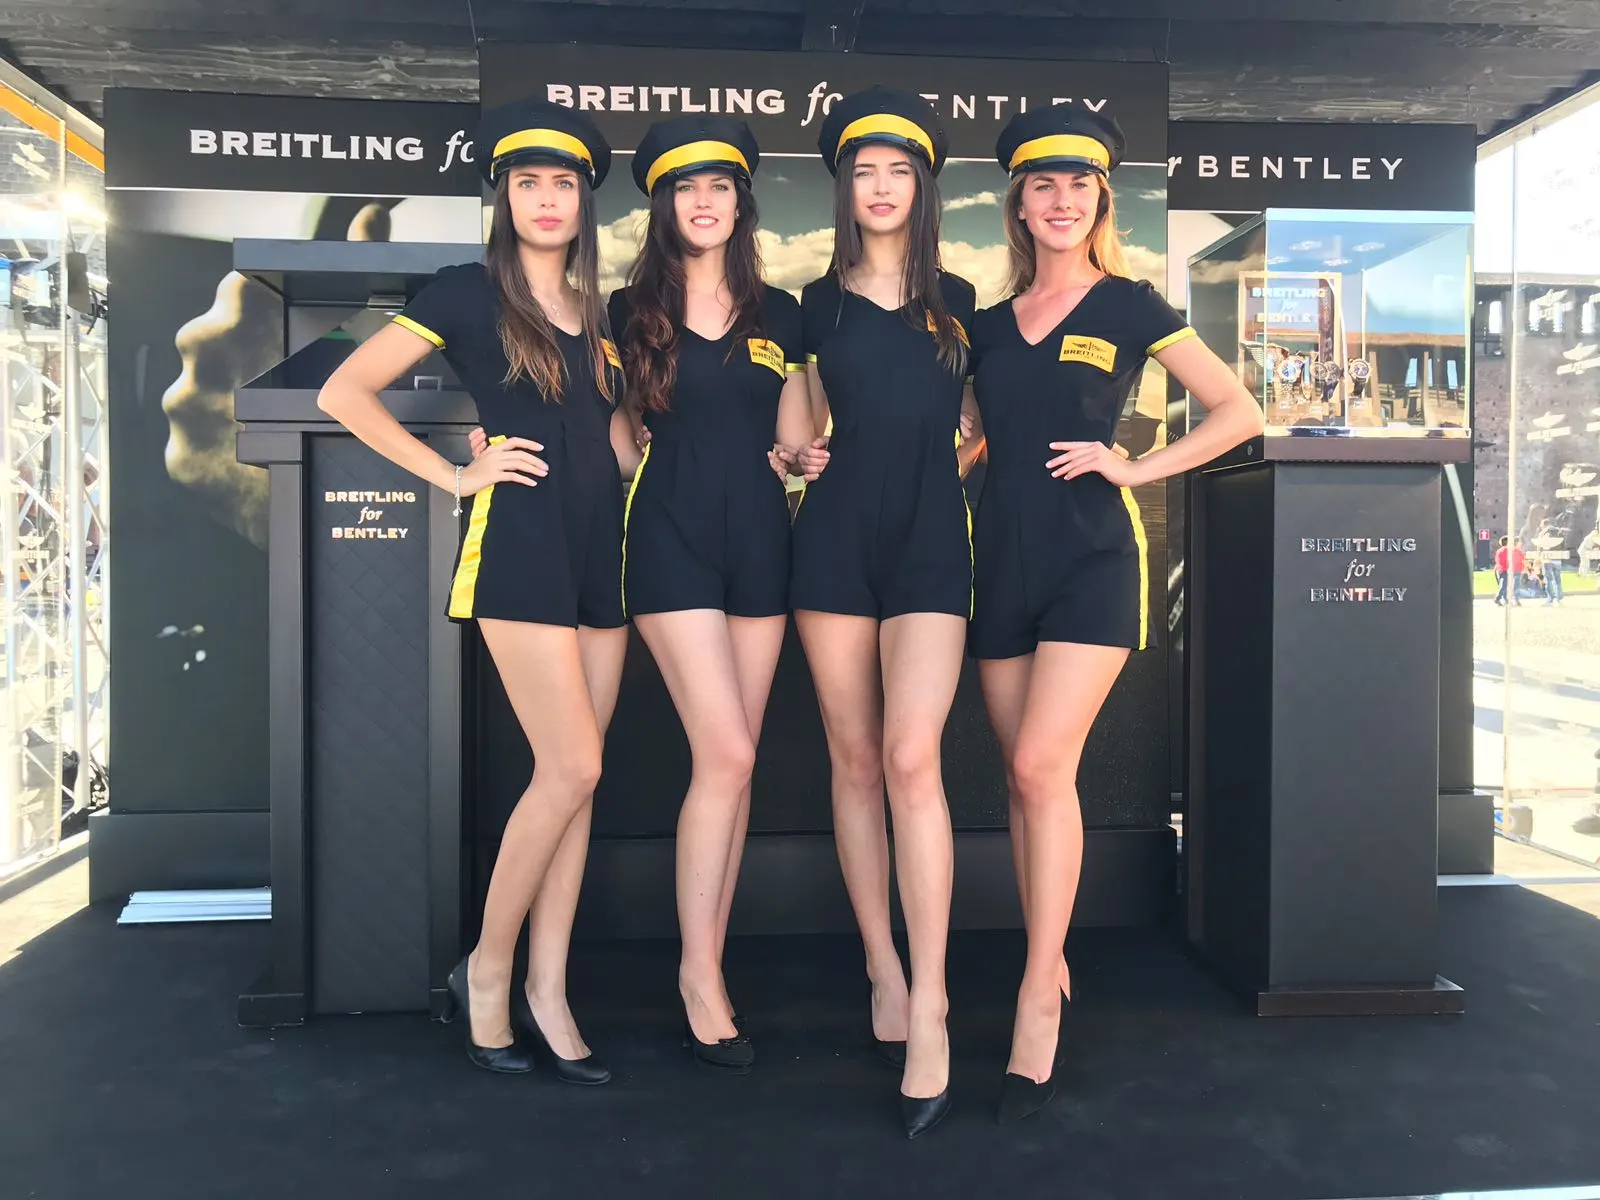 Why do you need hostesses and promotional models for the exhibition?